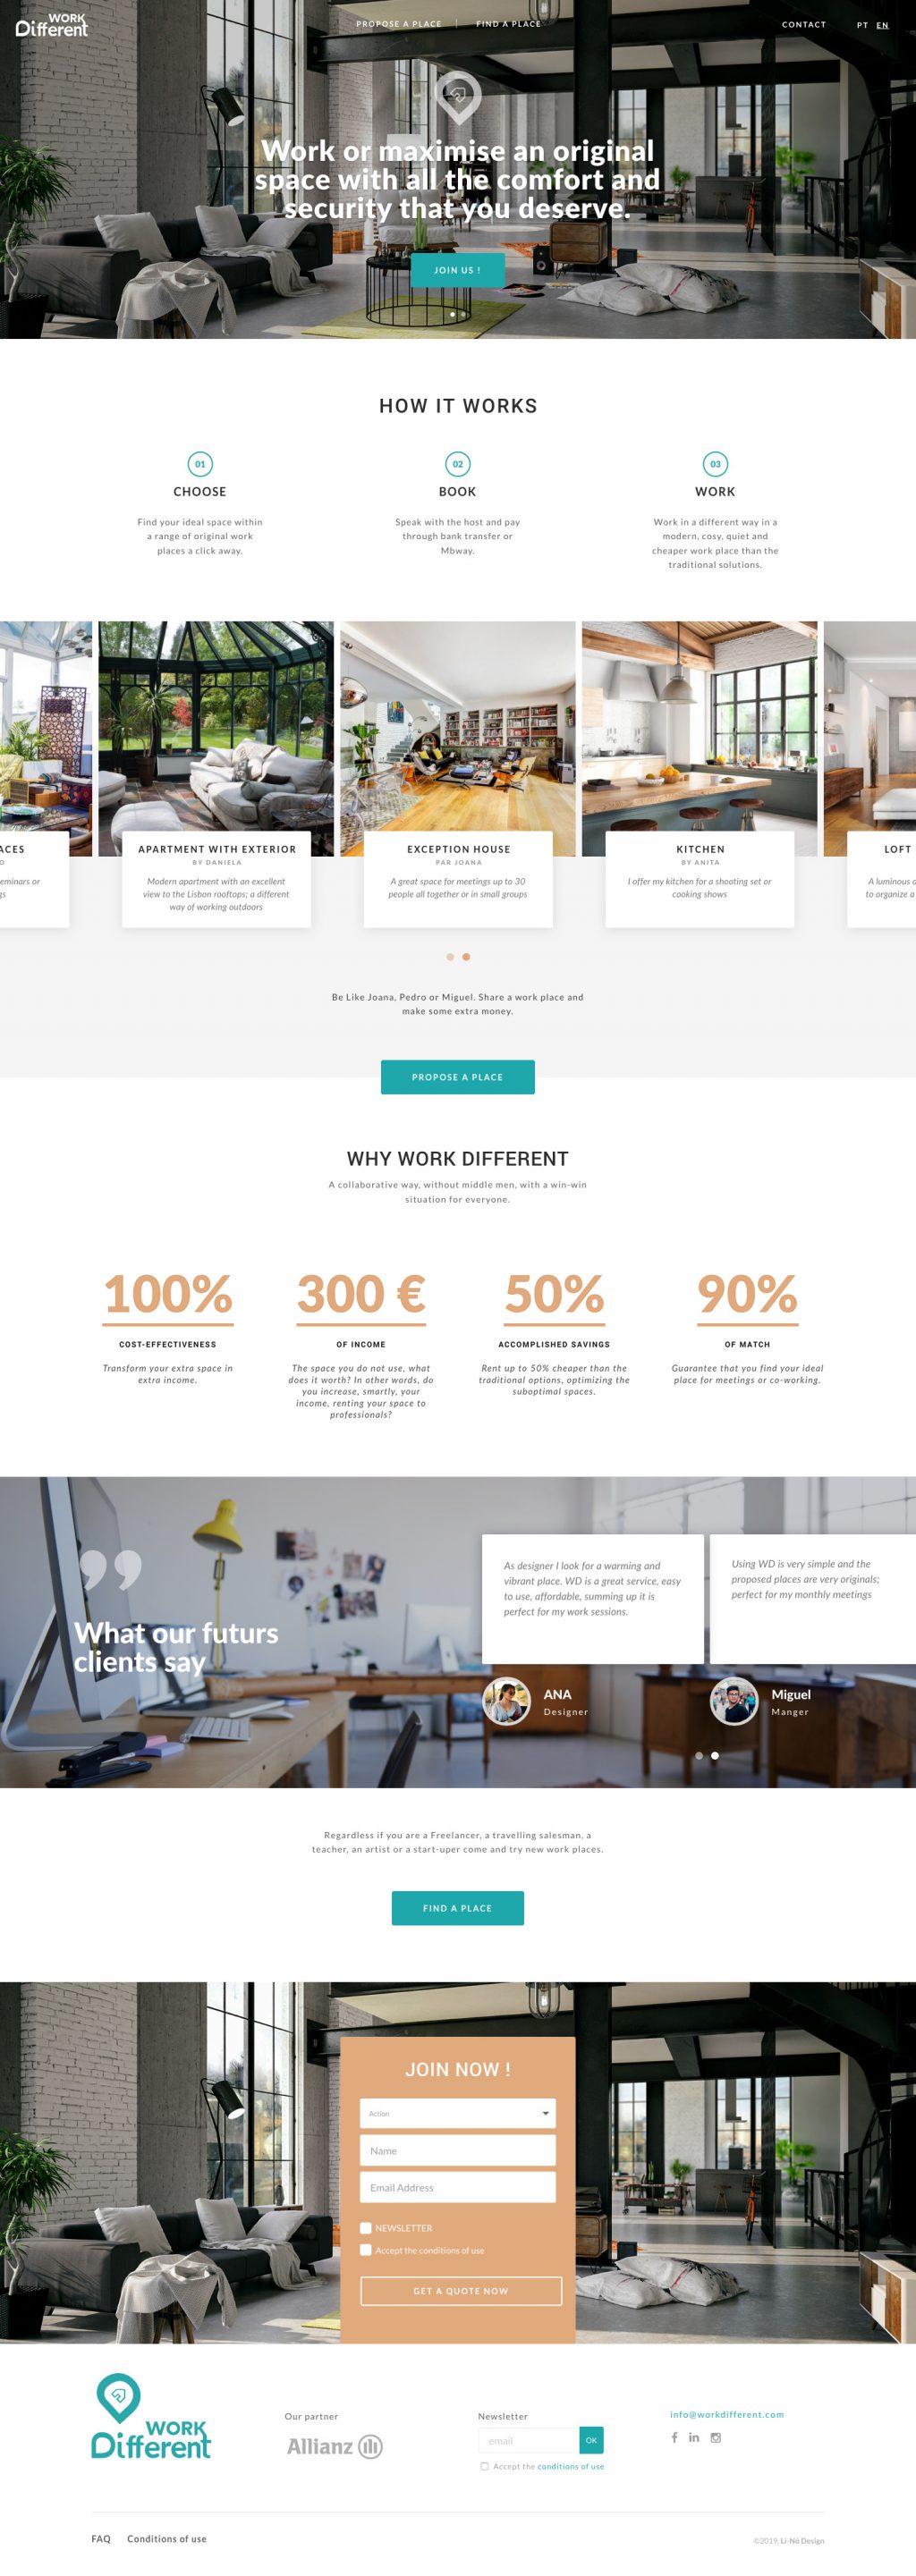 Work Different landing page